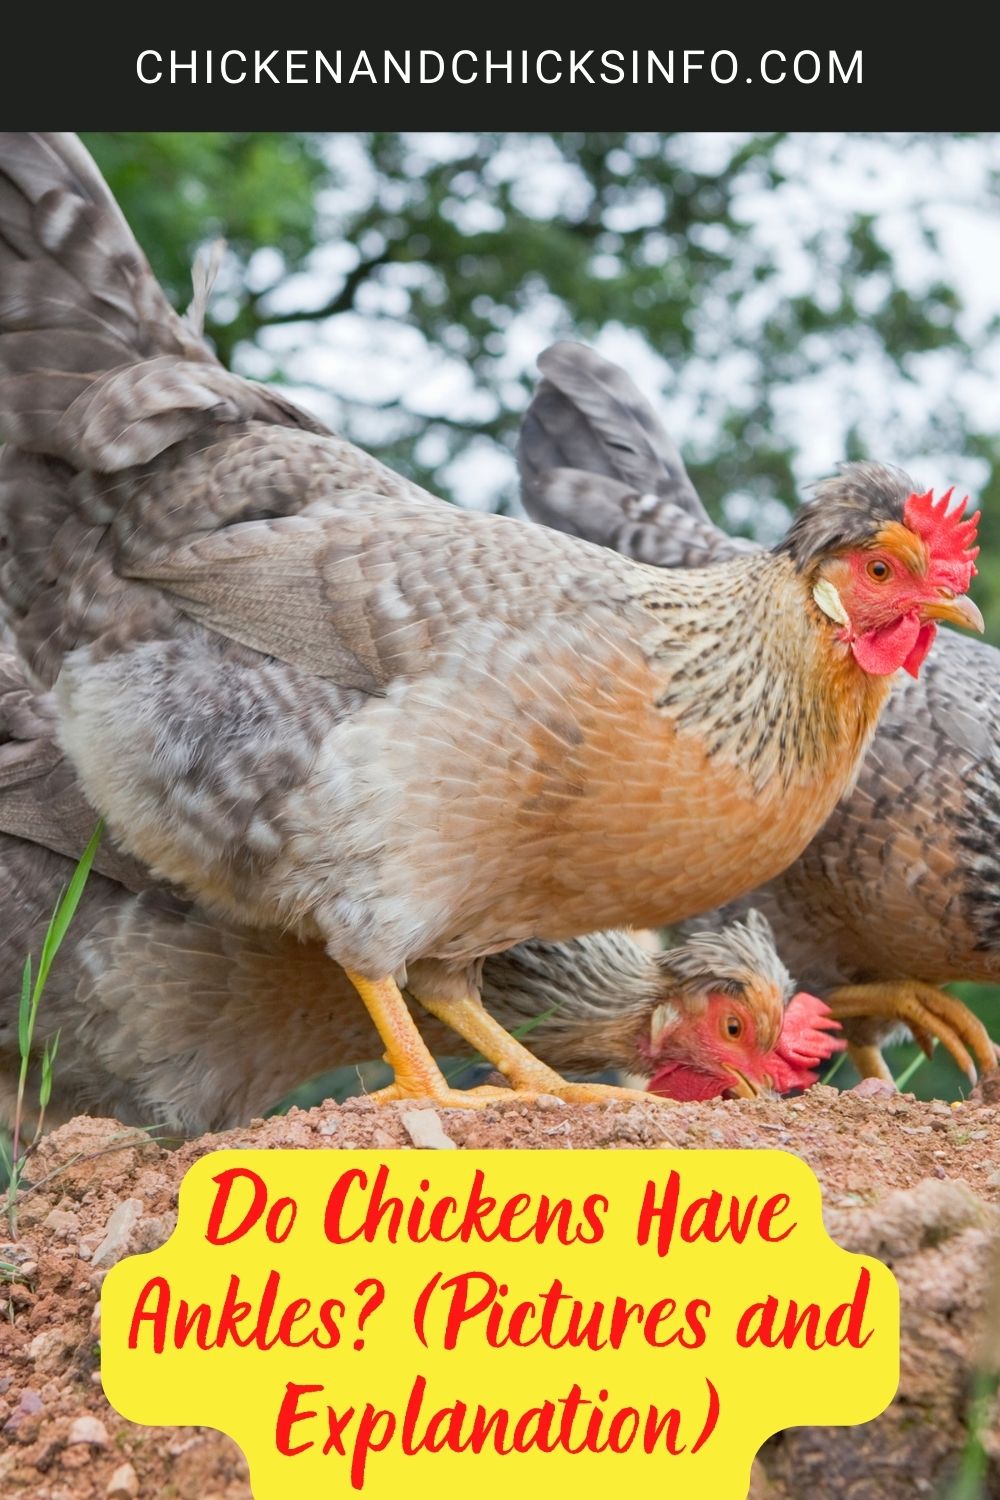 Do Chickens Have Ankles? (Pictures and Explanation) poster.
